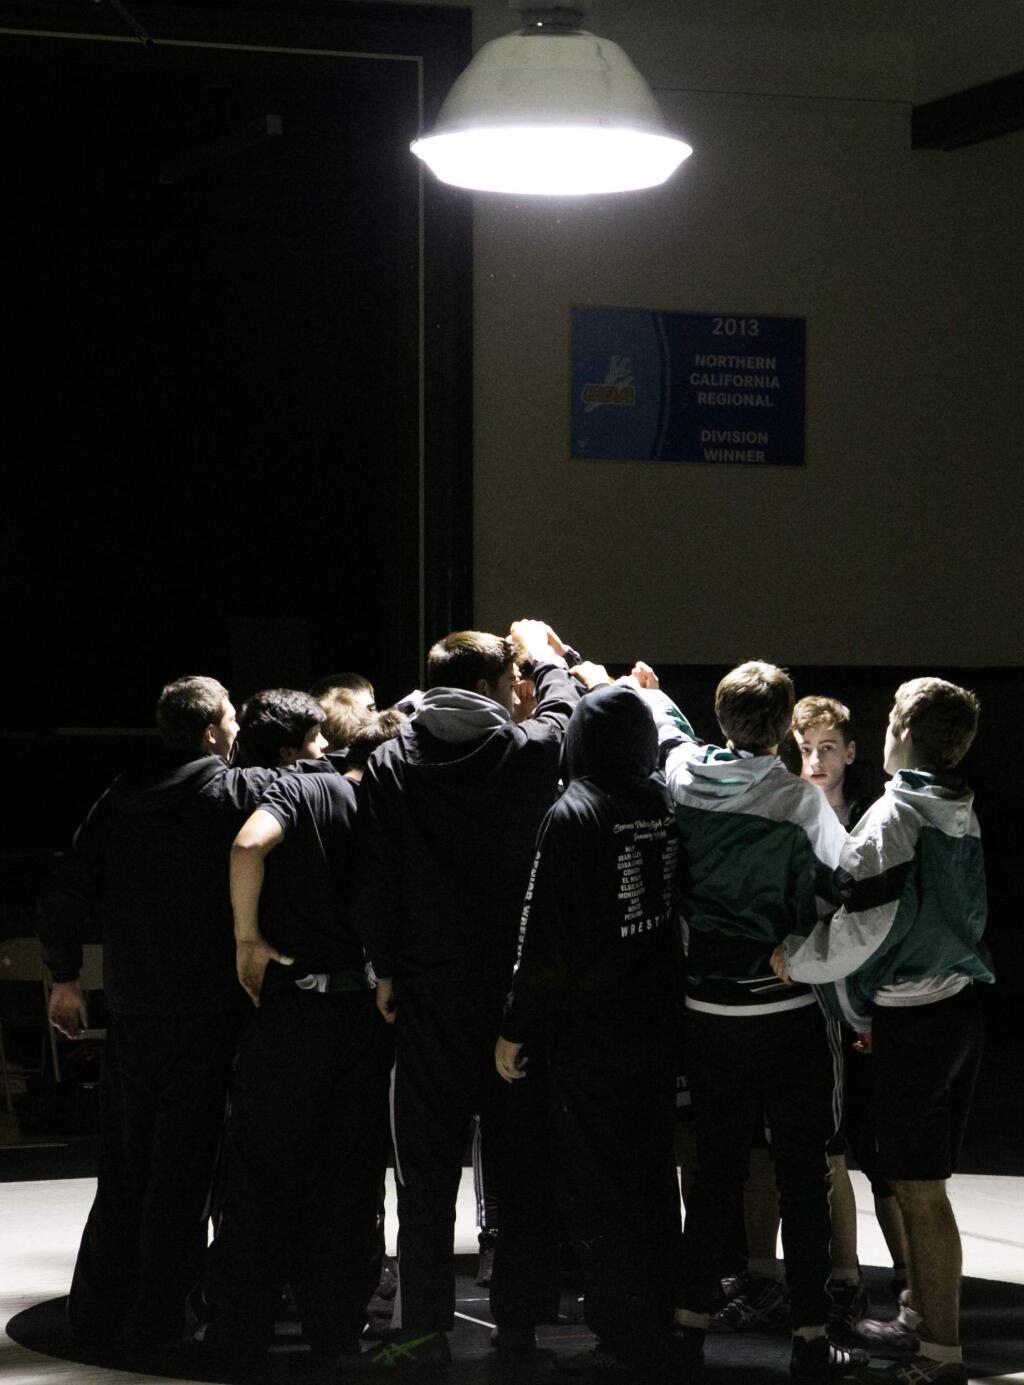 Sonoma Valley High wrestlers in their pre-meet huddle before a match against Healdsburg Wednesday night, Jan. 20, 2016, in Golton Hall. (Photo by Julie Vader/special to the Index-Tribune)